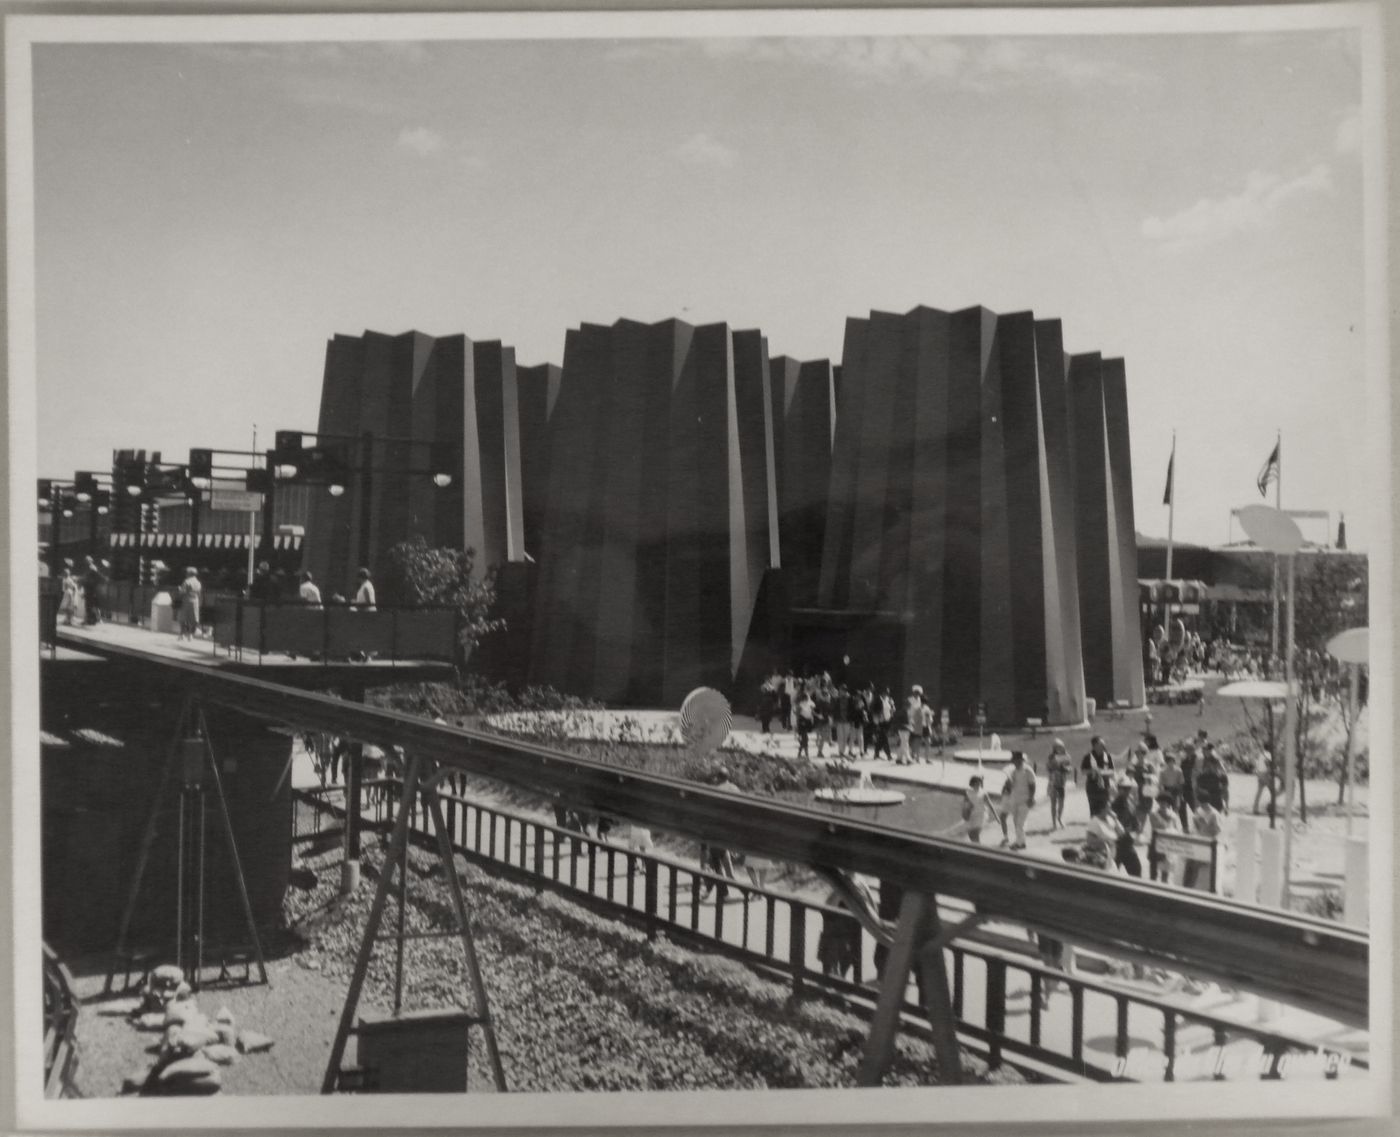 View of the Pavilion of the State of New York with a minirail station on the left, Expo 67, Montréal, Québec